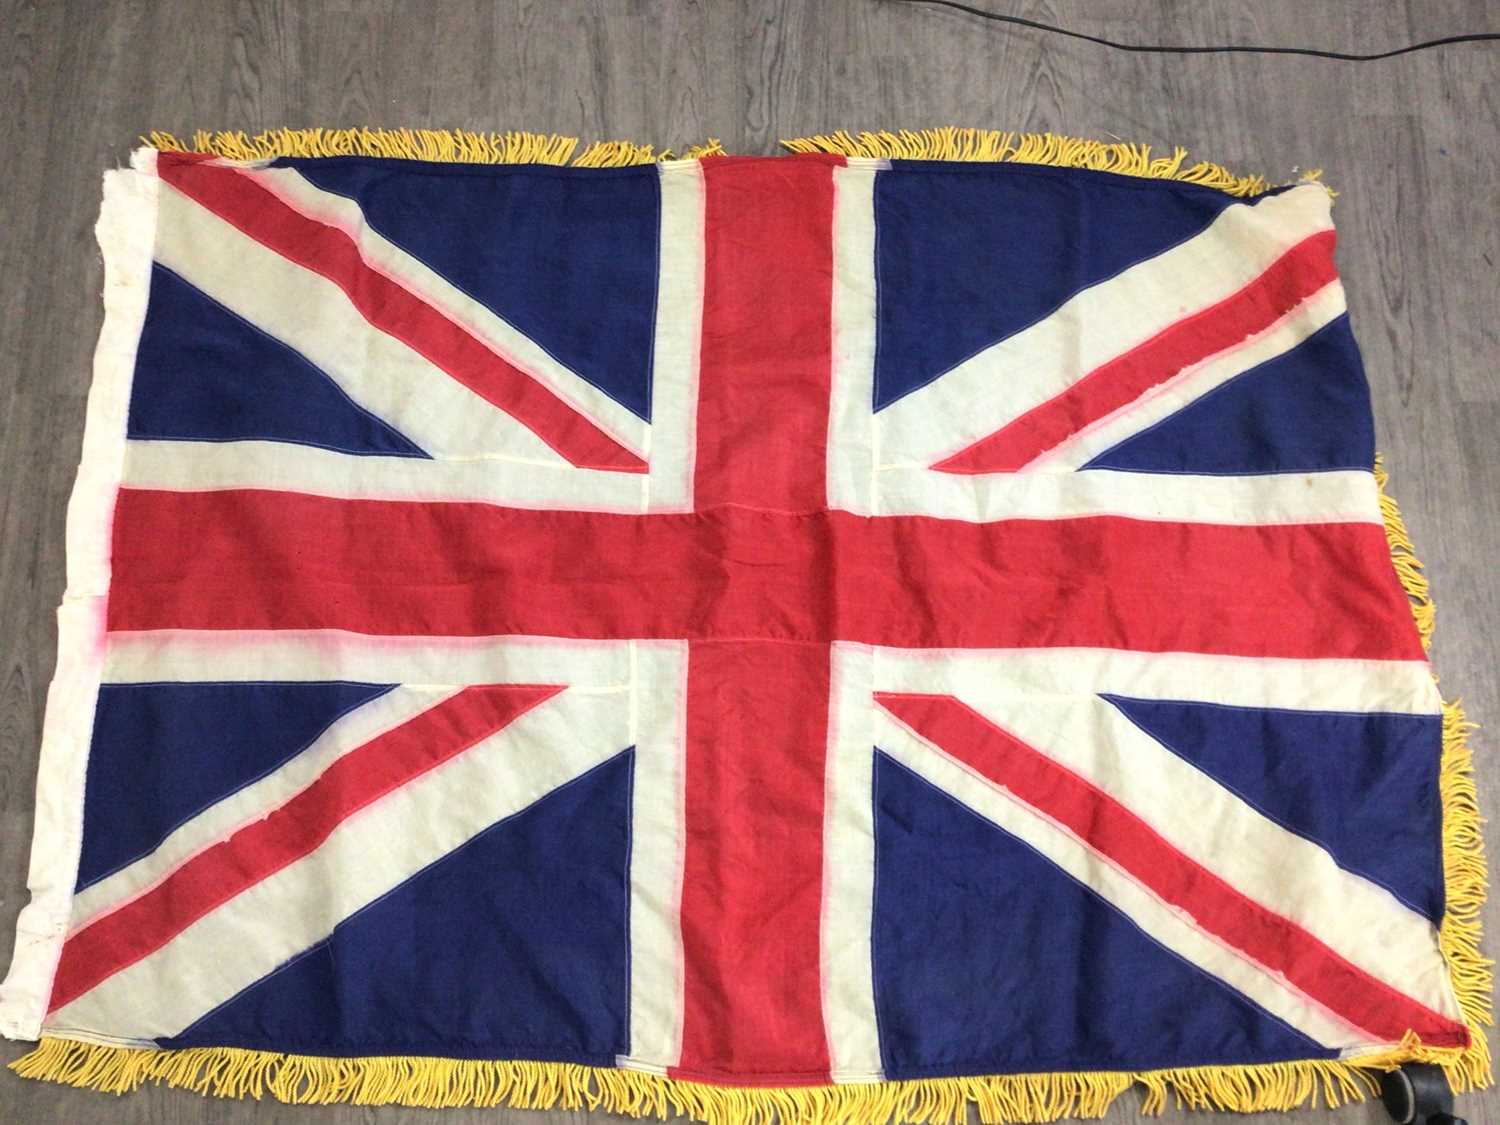 TWO UNION FLAGS, 20TH CENTURY - Image 2 of 3